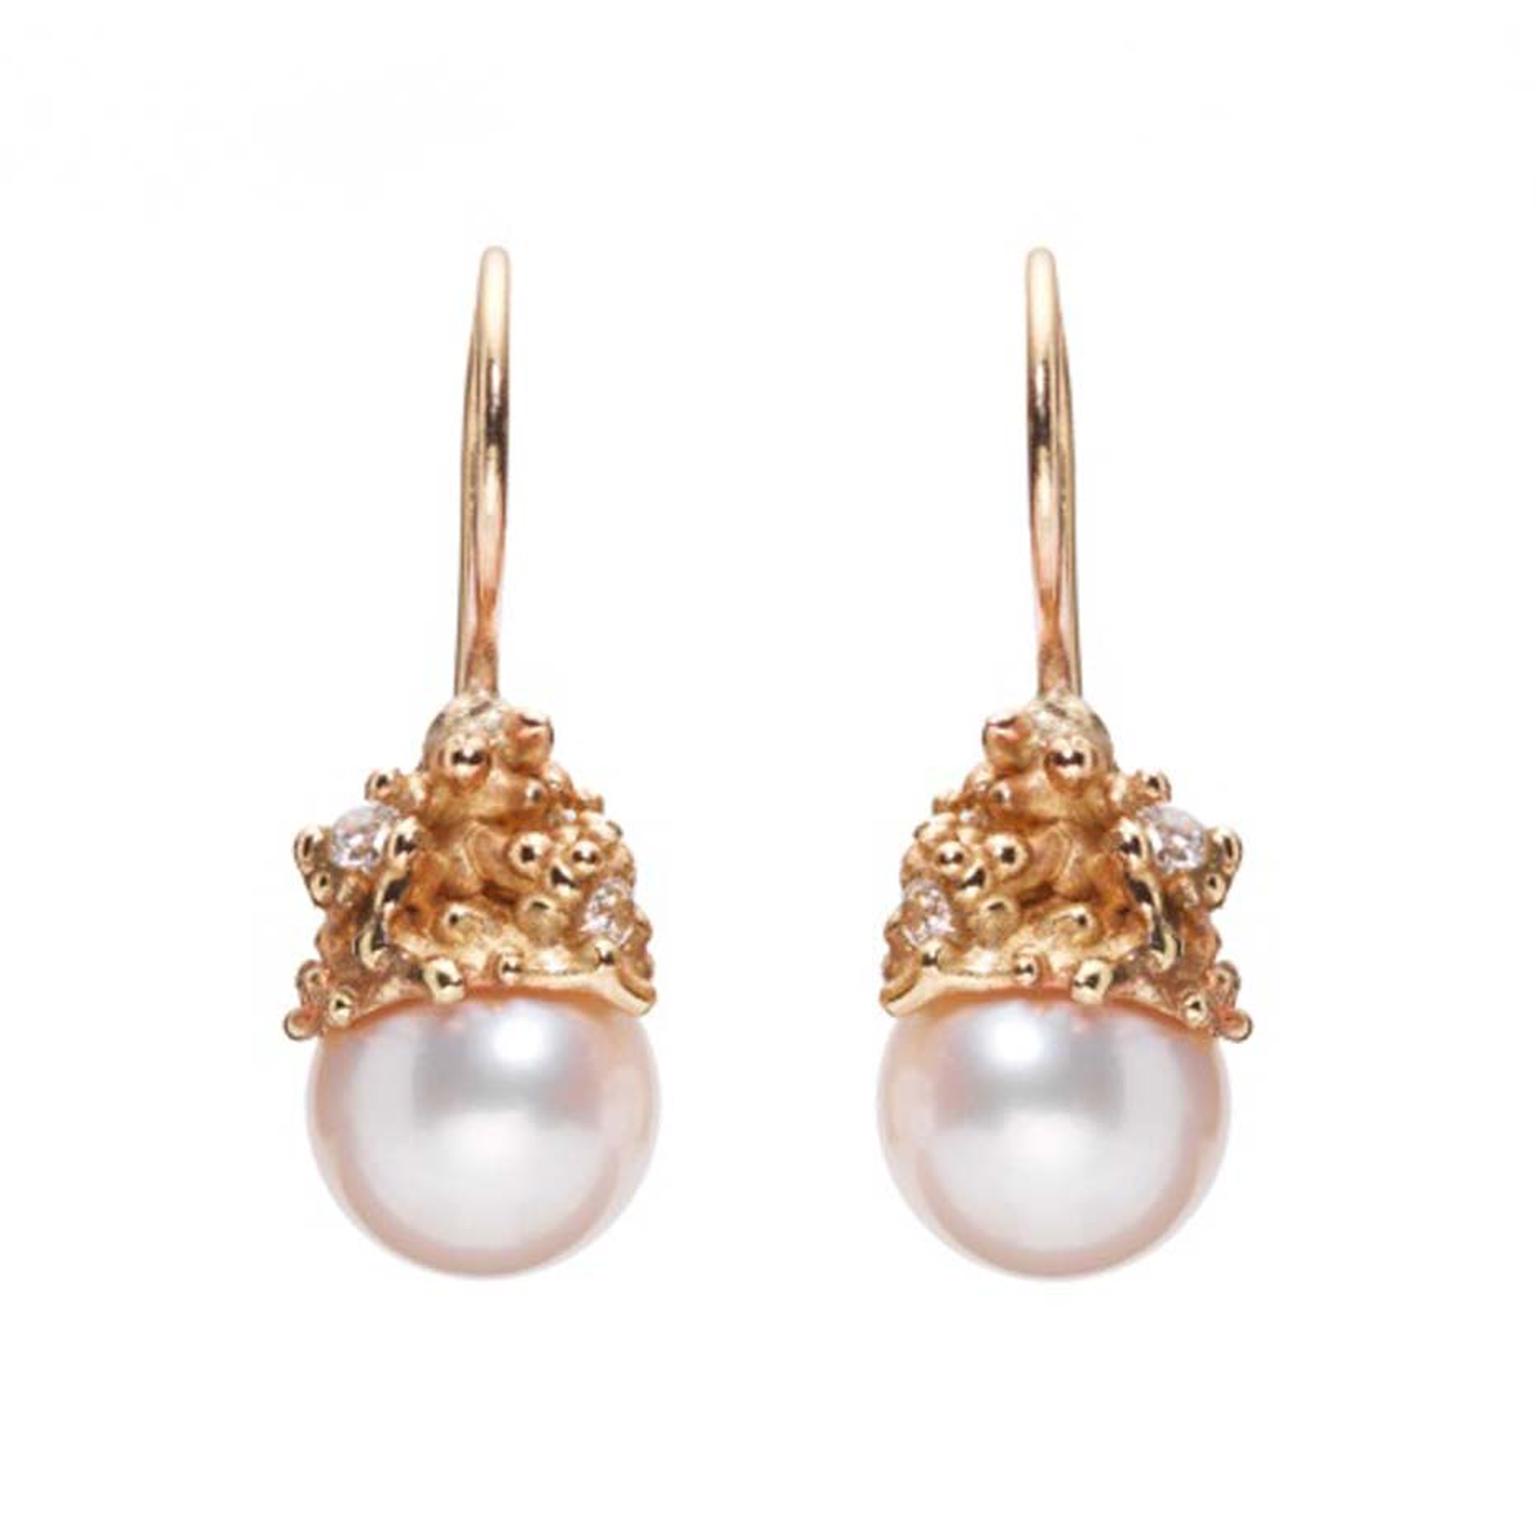 Ruth Tomlinson rose gold and pearl earrings.